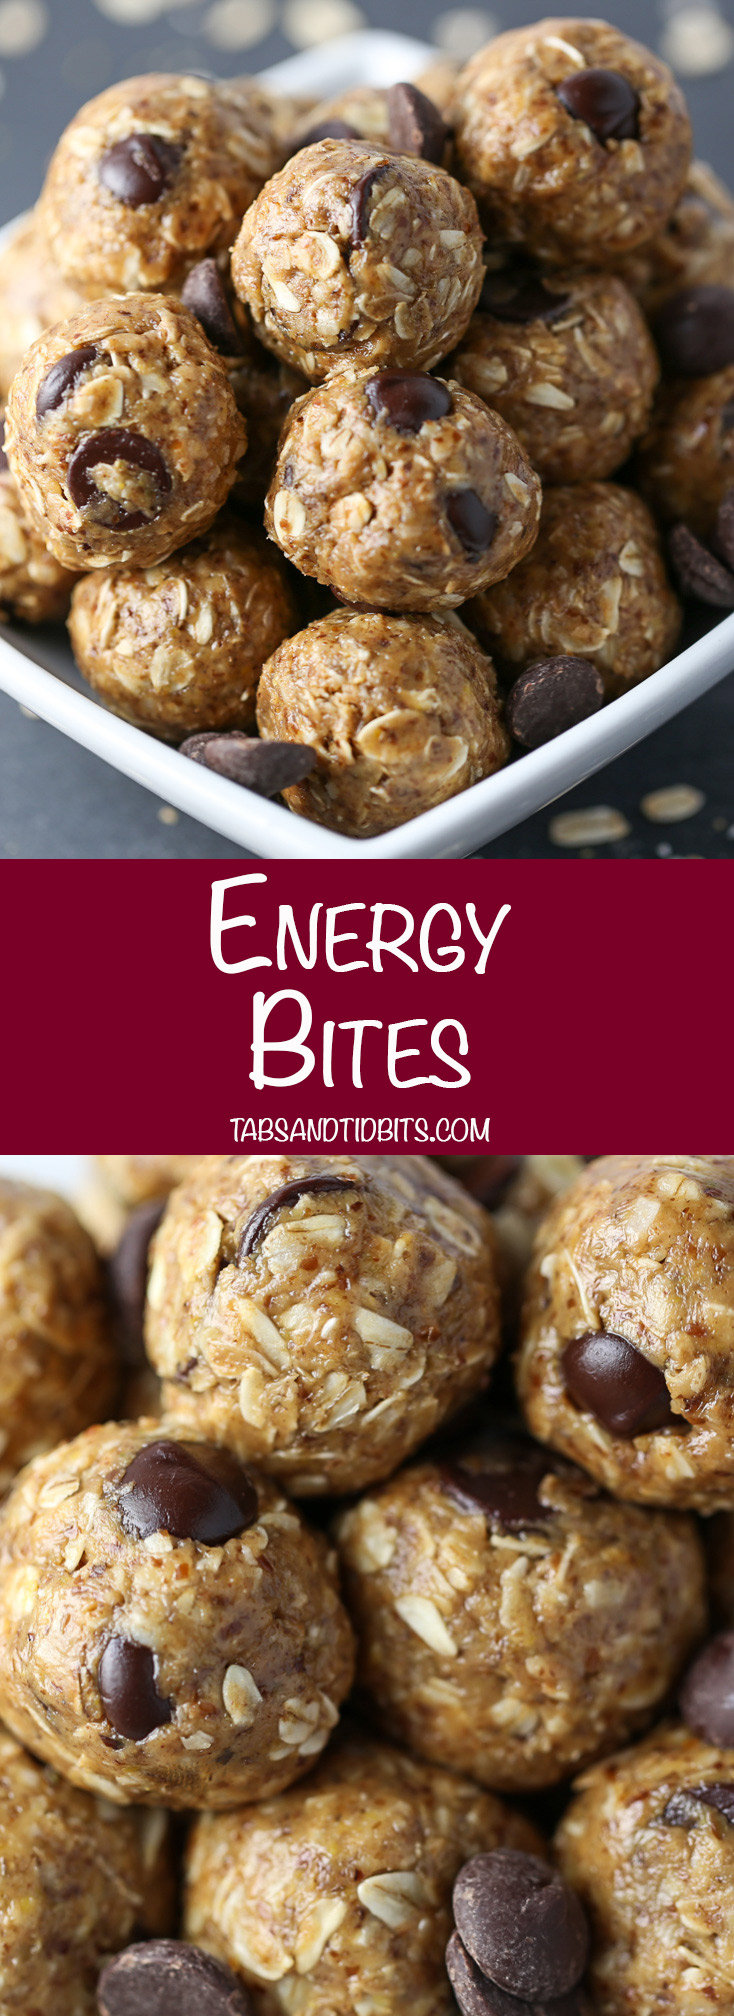 Energy Bites - Power packed ingredients that make for a quick and simple healthy snack!